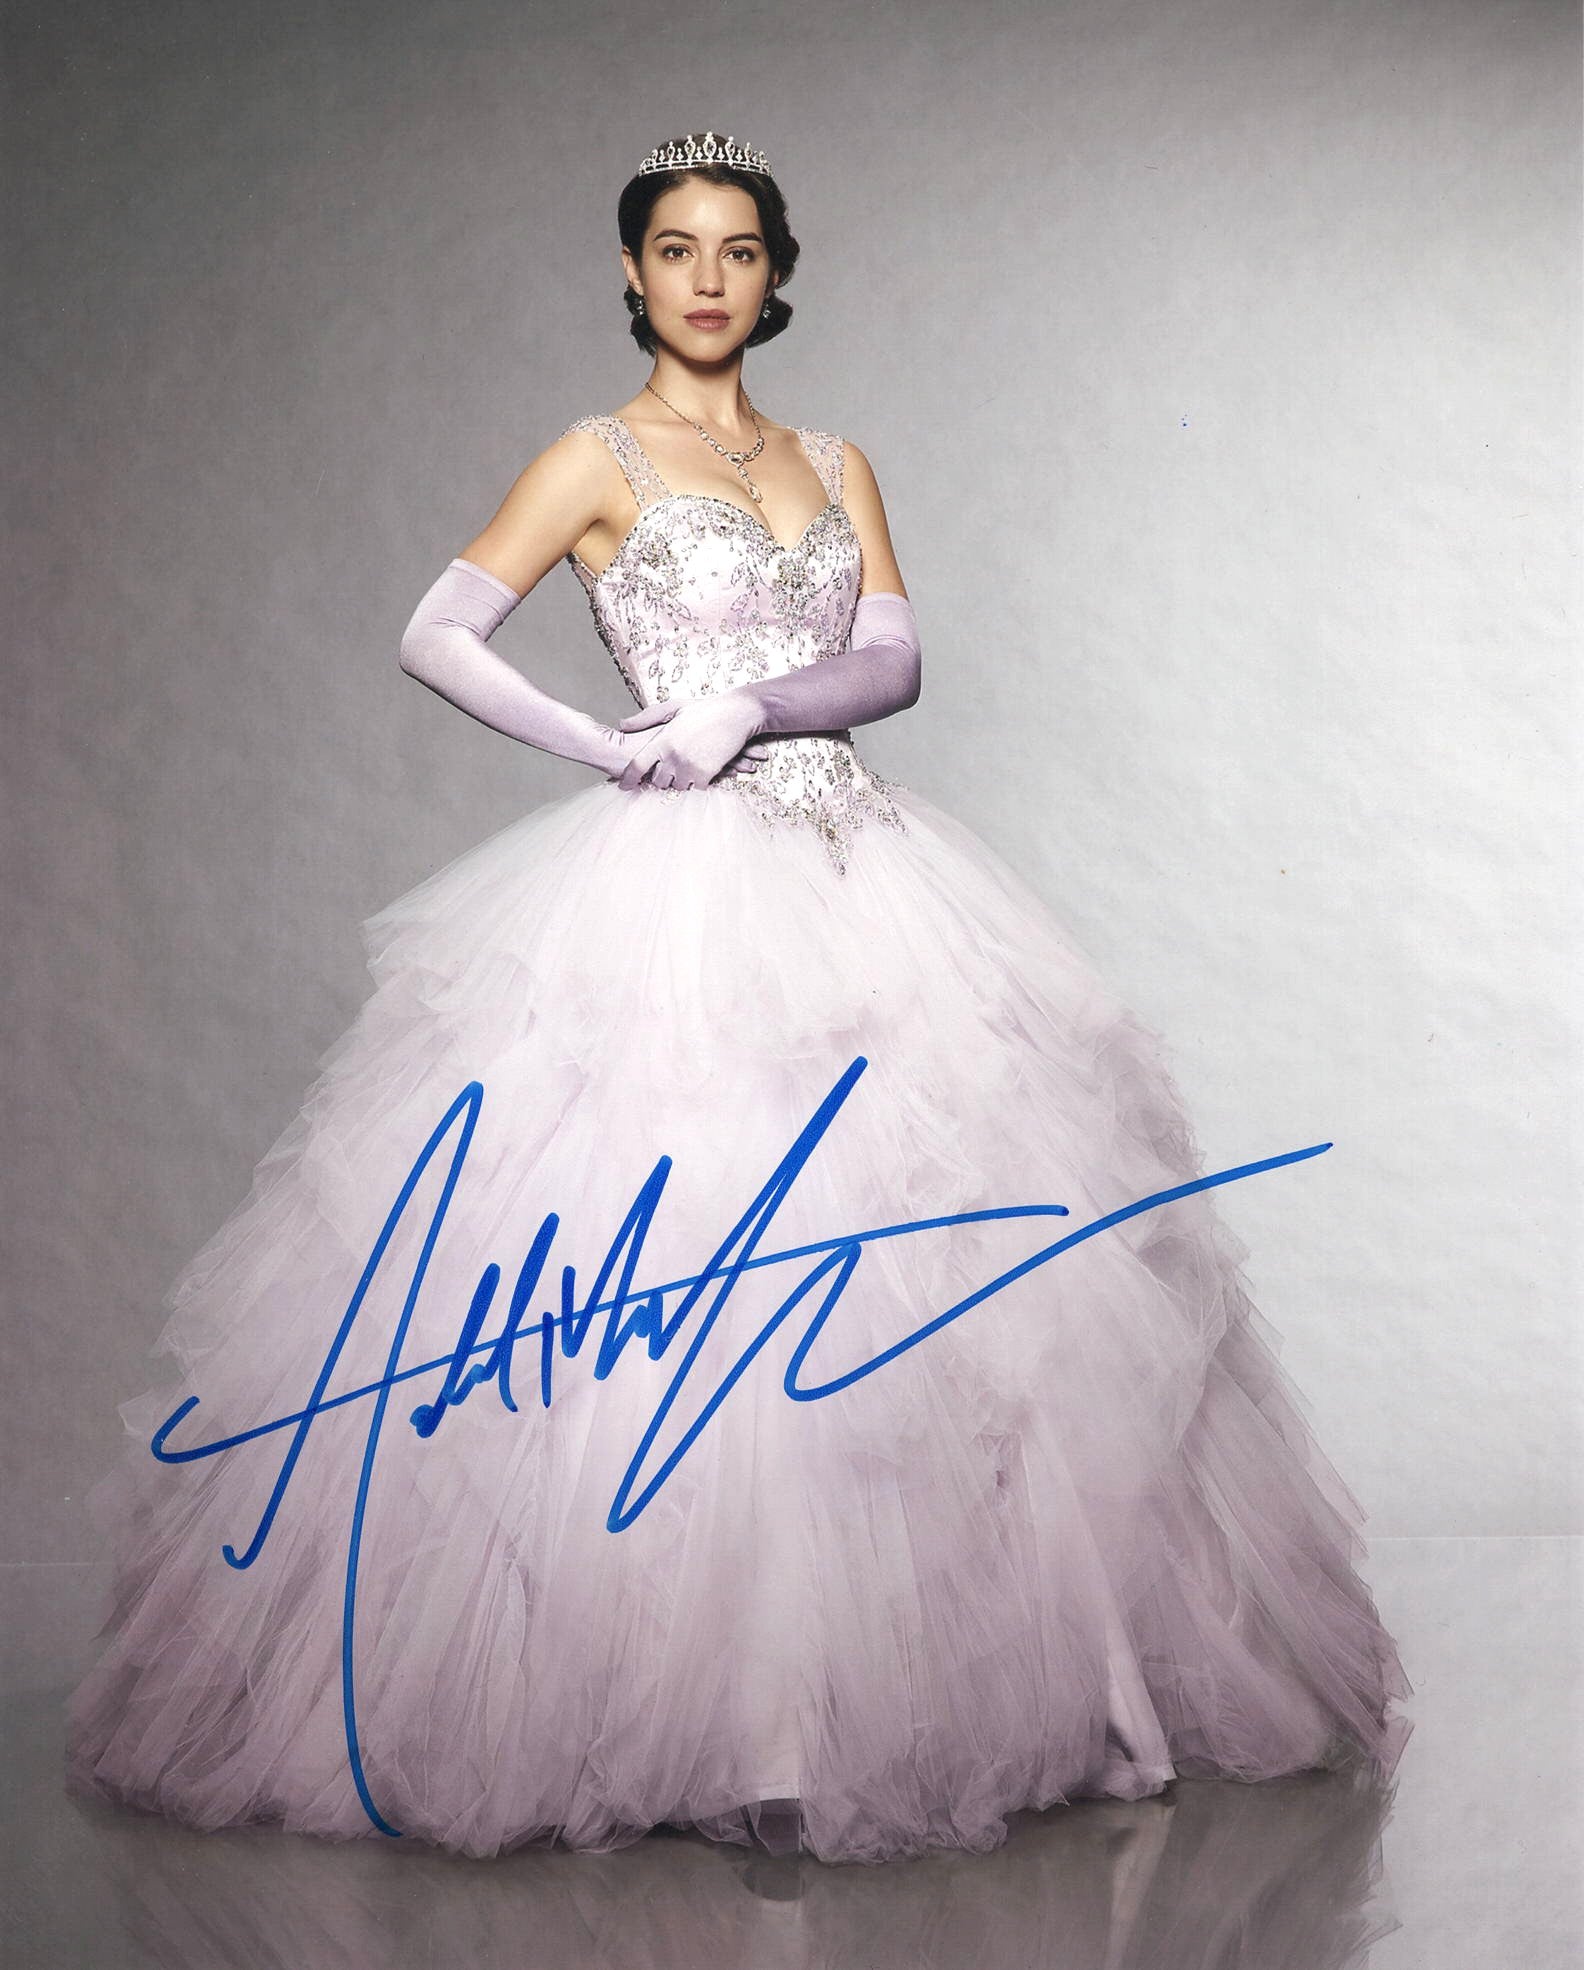 Adelaide Kane Once Upon A Time Signed Autograph 8x10 Photo - Outlaw Hobbies Authentic Autographs